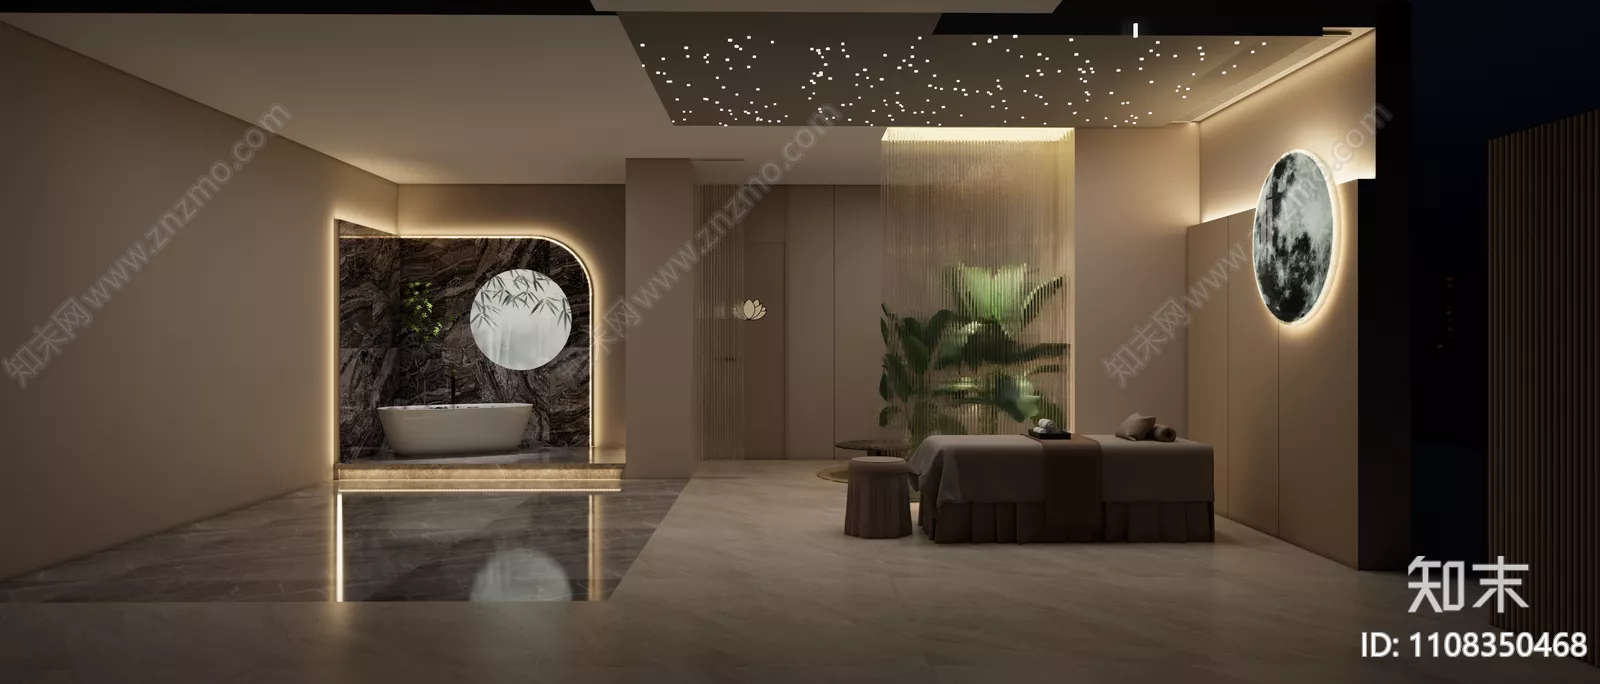 MODERN SPA AND BEAUTY - SKETCHUP 3D SCENE - VRAY OR ENSCAPE - ID14063